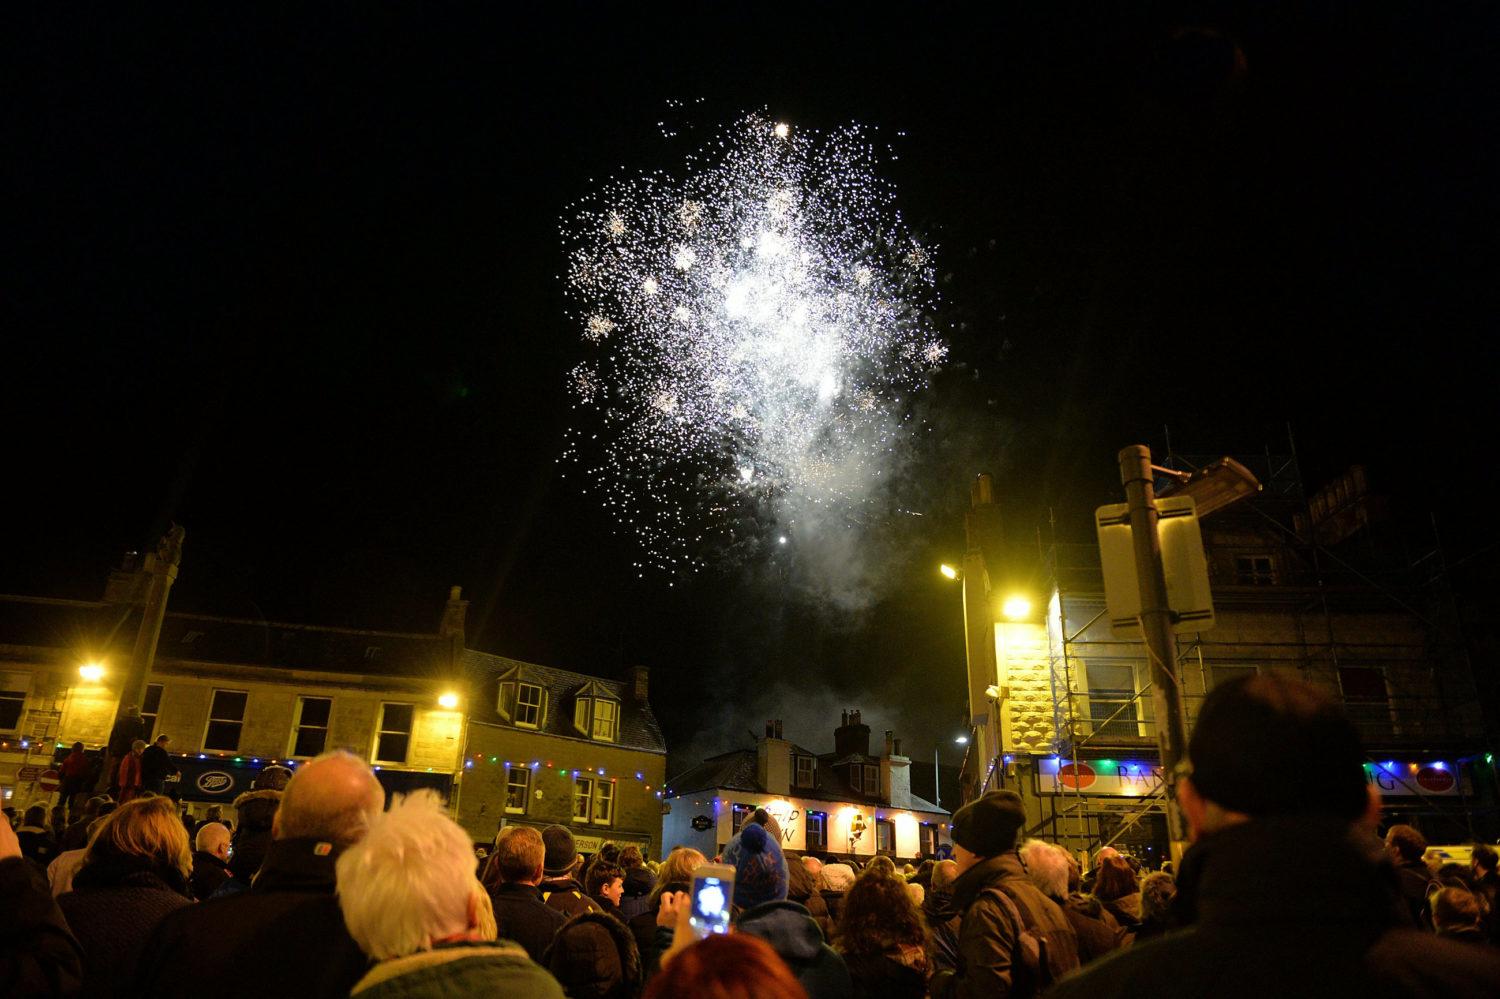 Tourist town wants teens banned from Hogmanay festivities